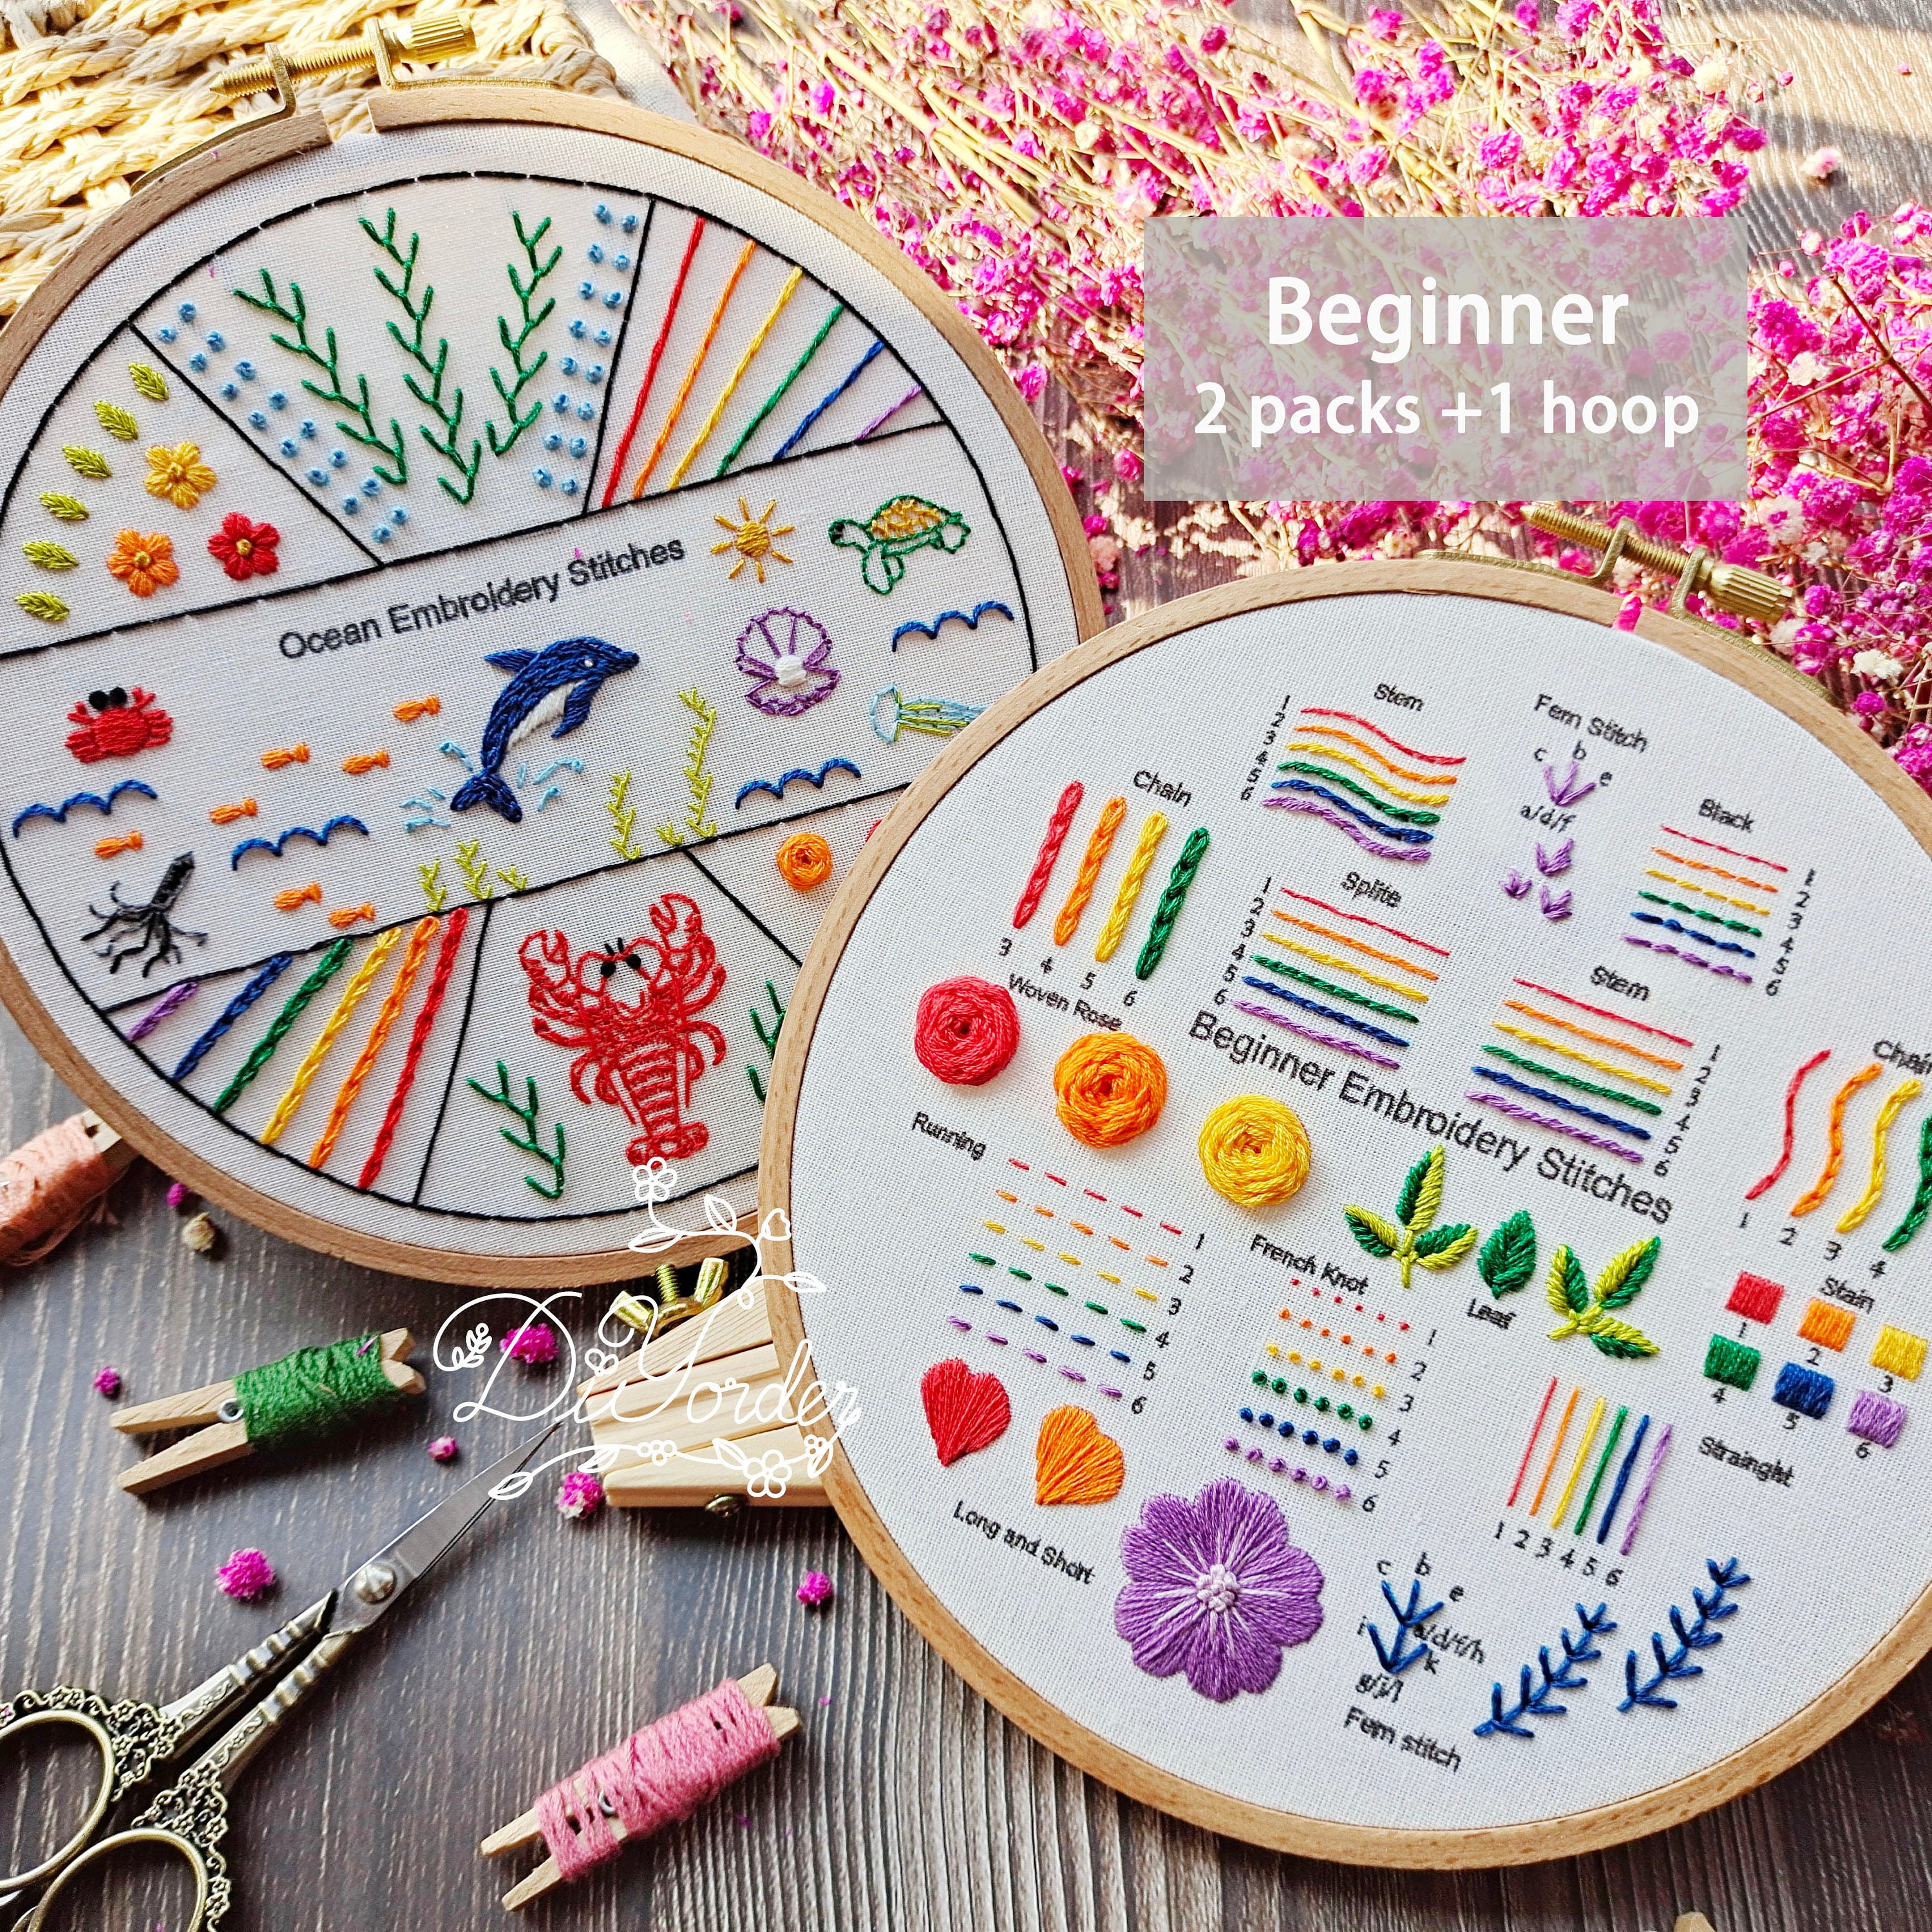 Povitrulya Embroidery Kit for Beginners 'Rainbow' - Funny Starter Kit for Hand Embroidery with Stamped Pattern, Pre-Sorted Floss and Bamboo Hoop 